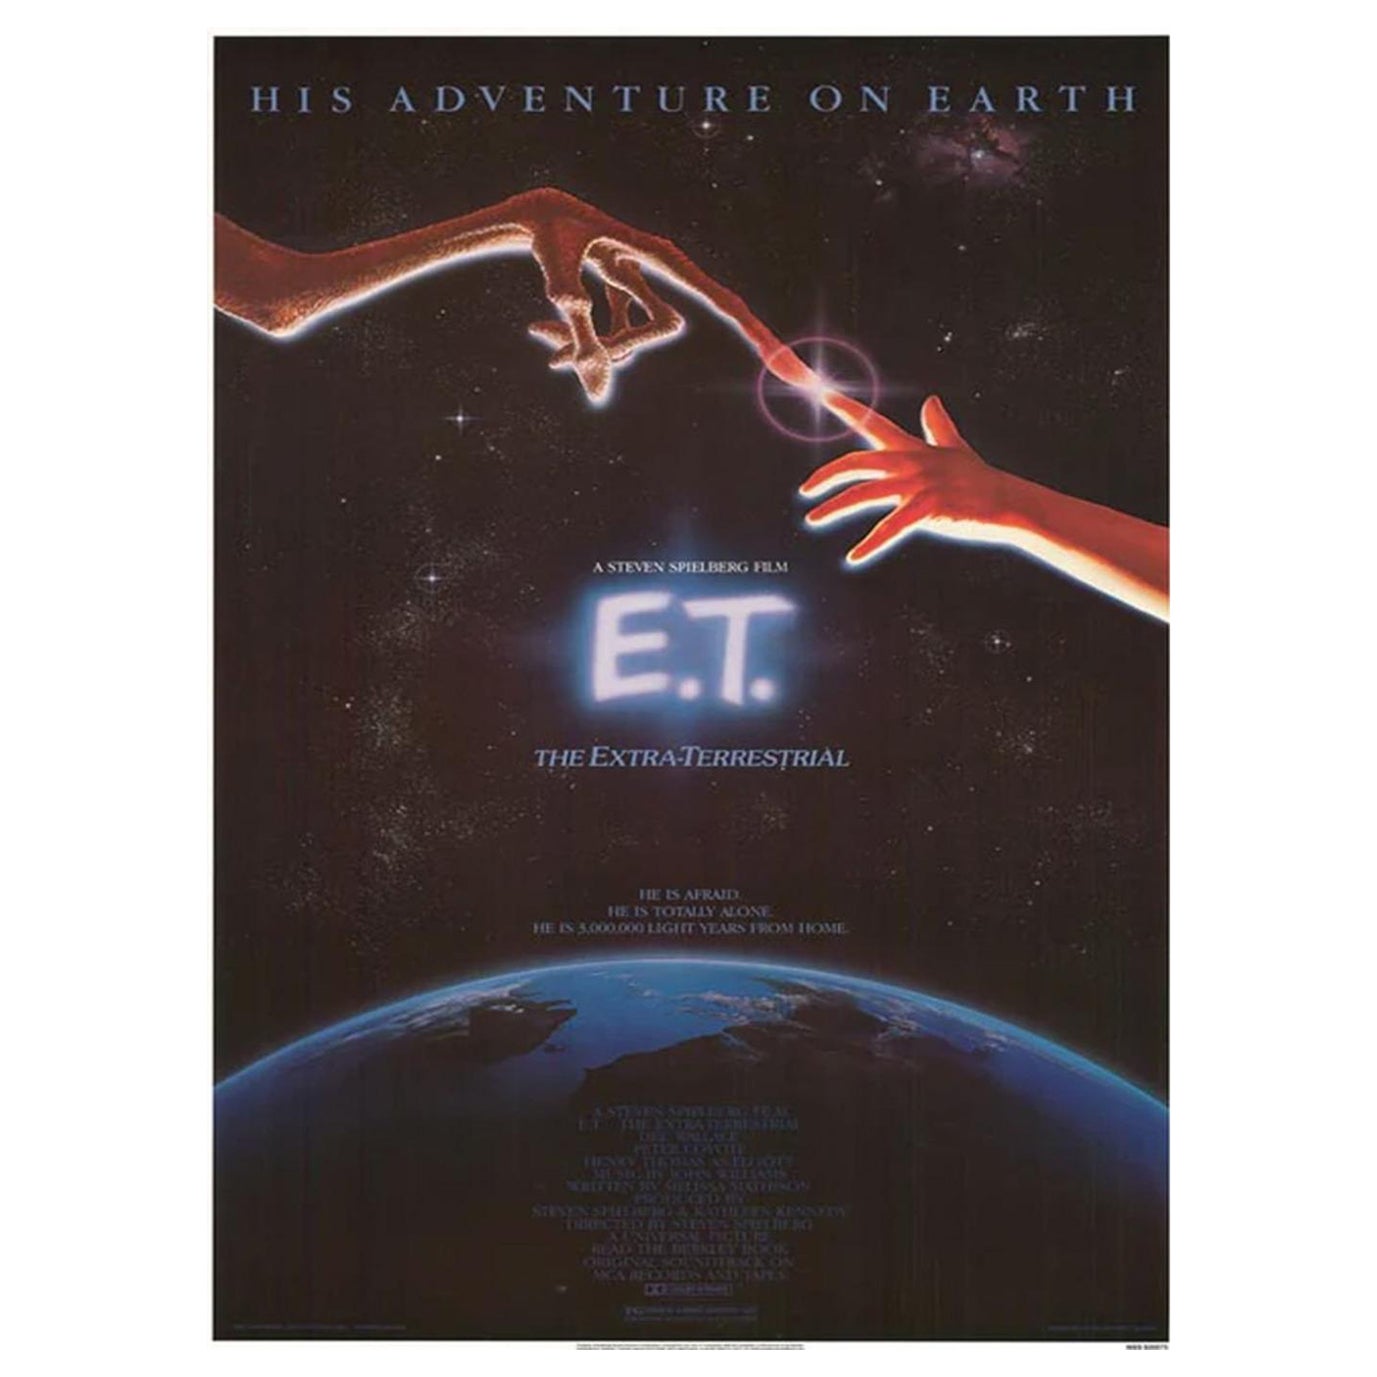 1982 E.T. The Extra Terrestrial Original Vintage Poster For Sale